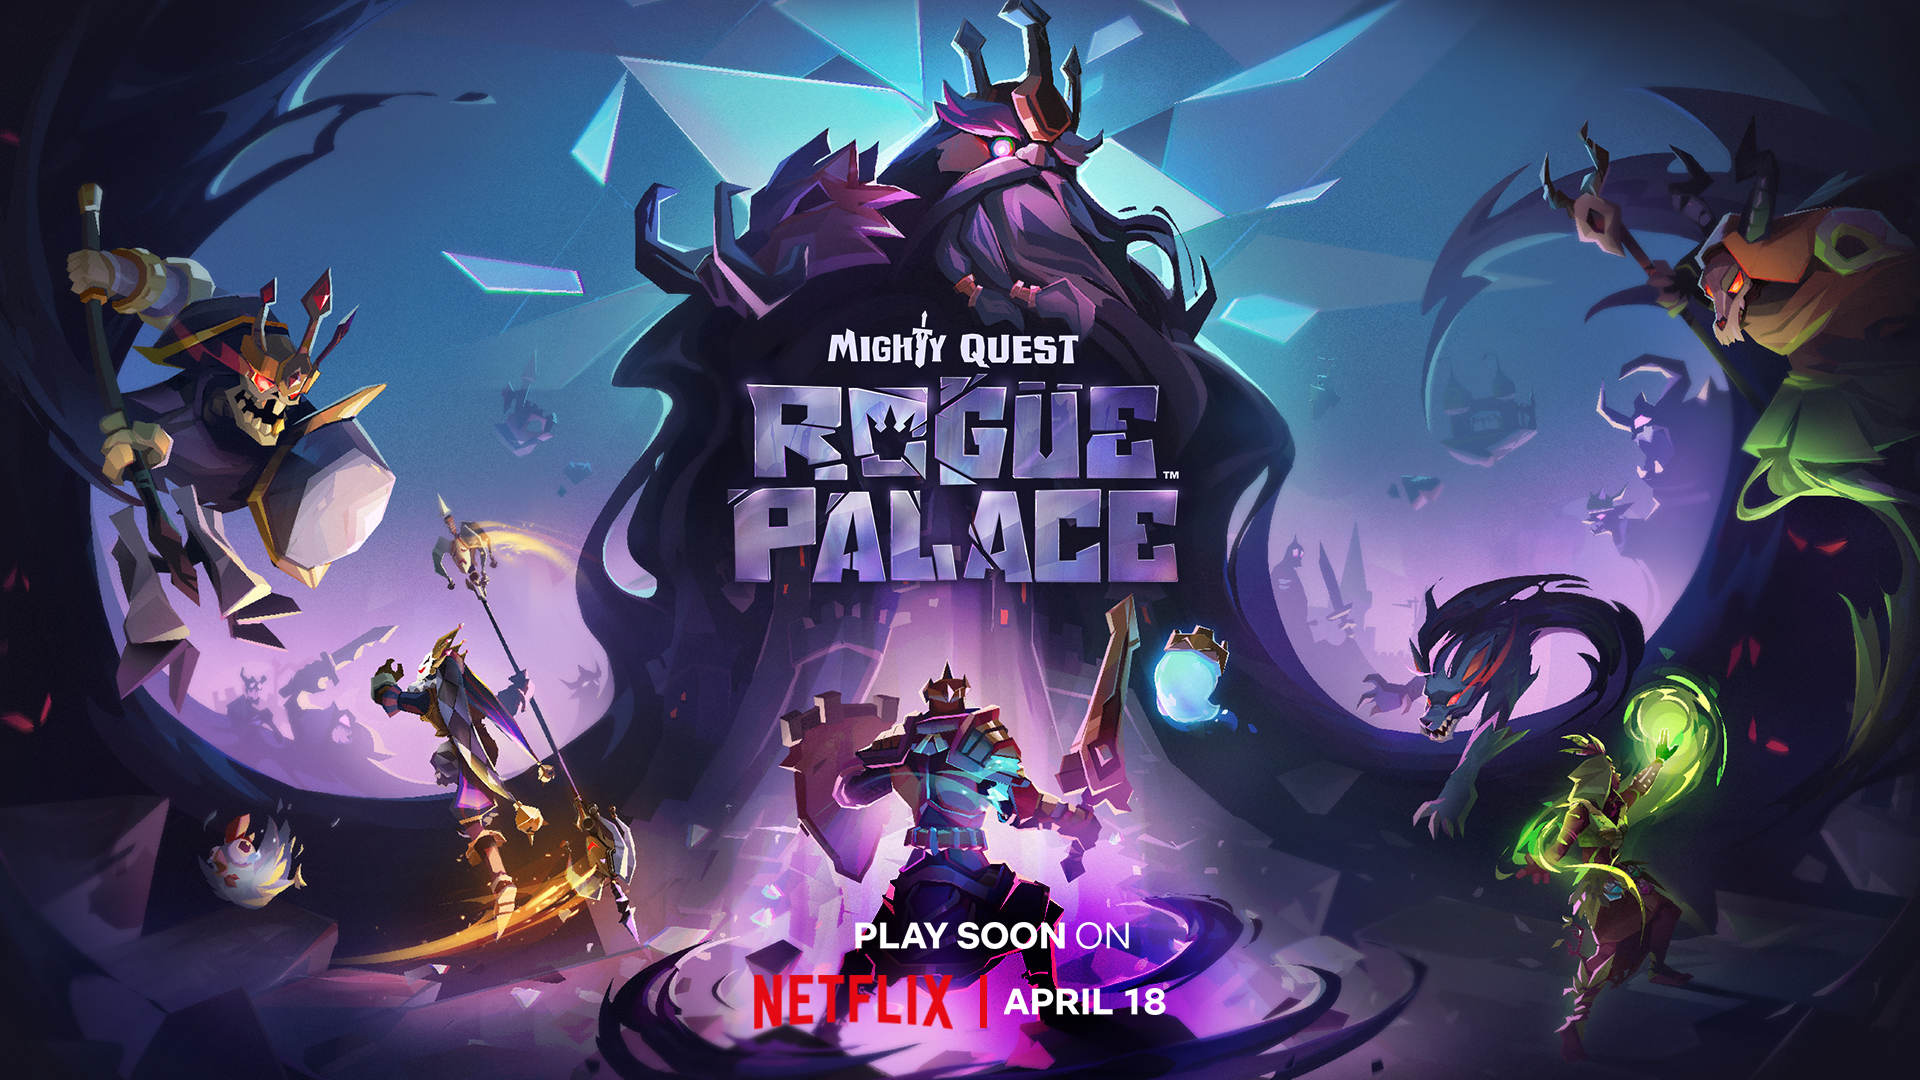 Mighty Quest: Rogue Palace key art.